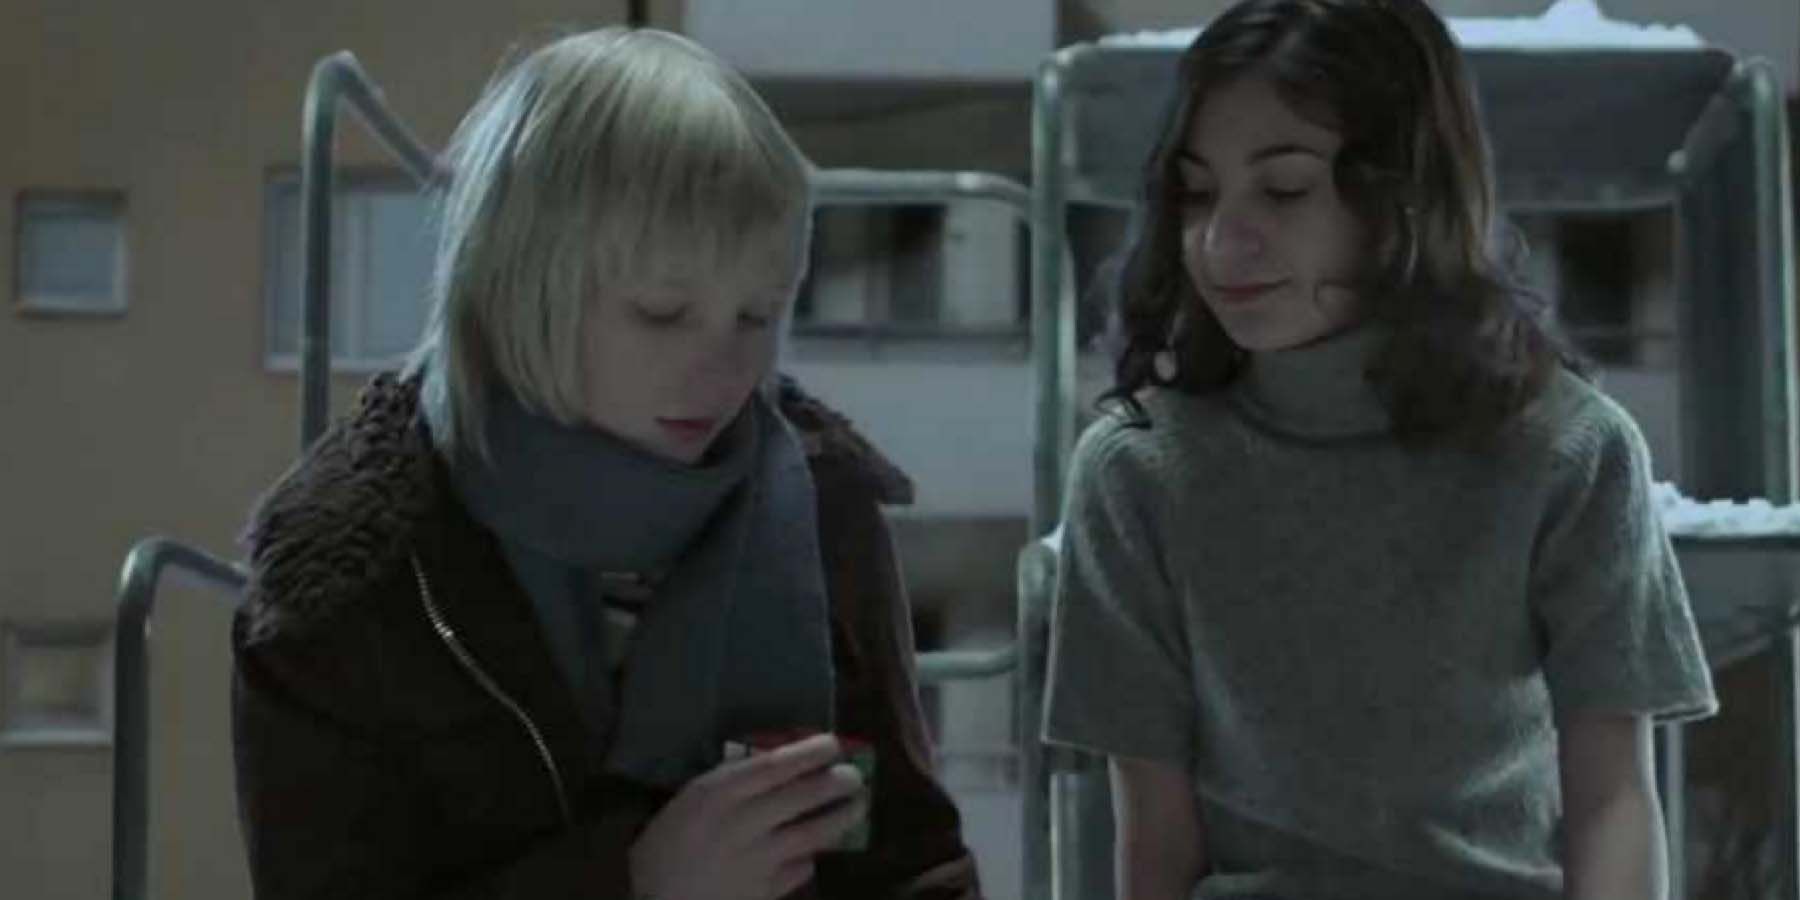 The characters in Let The Right One In